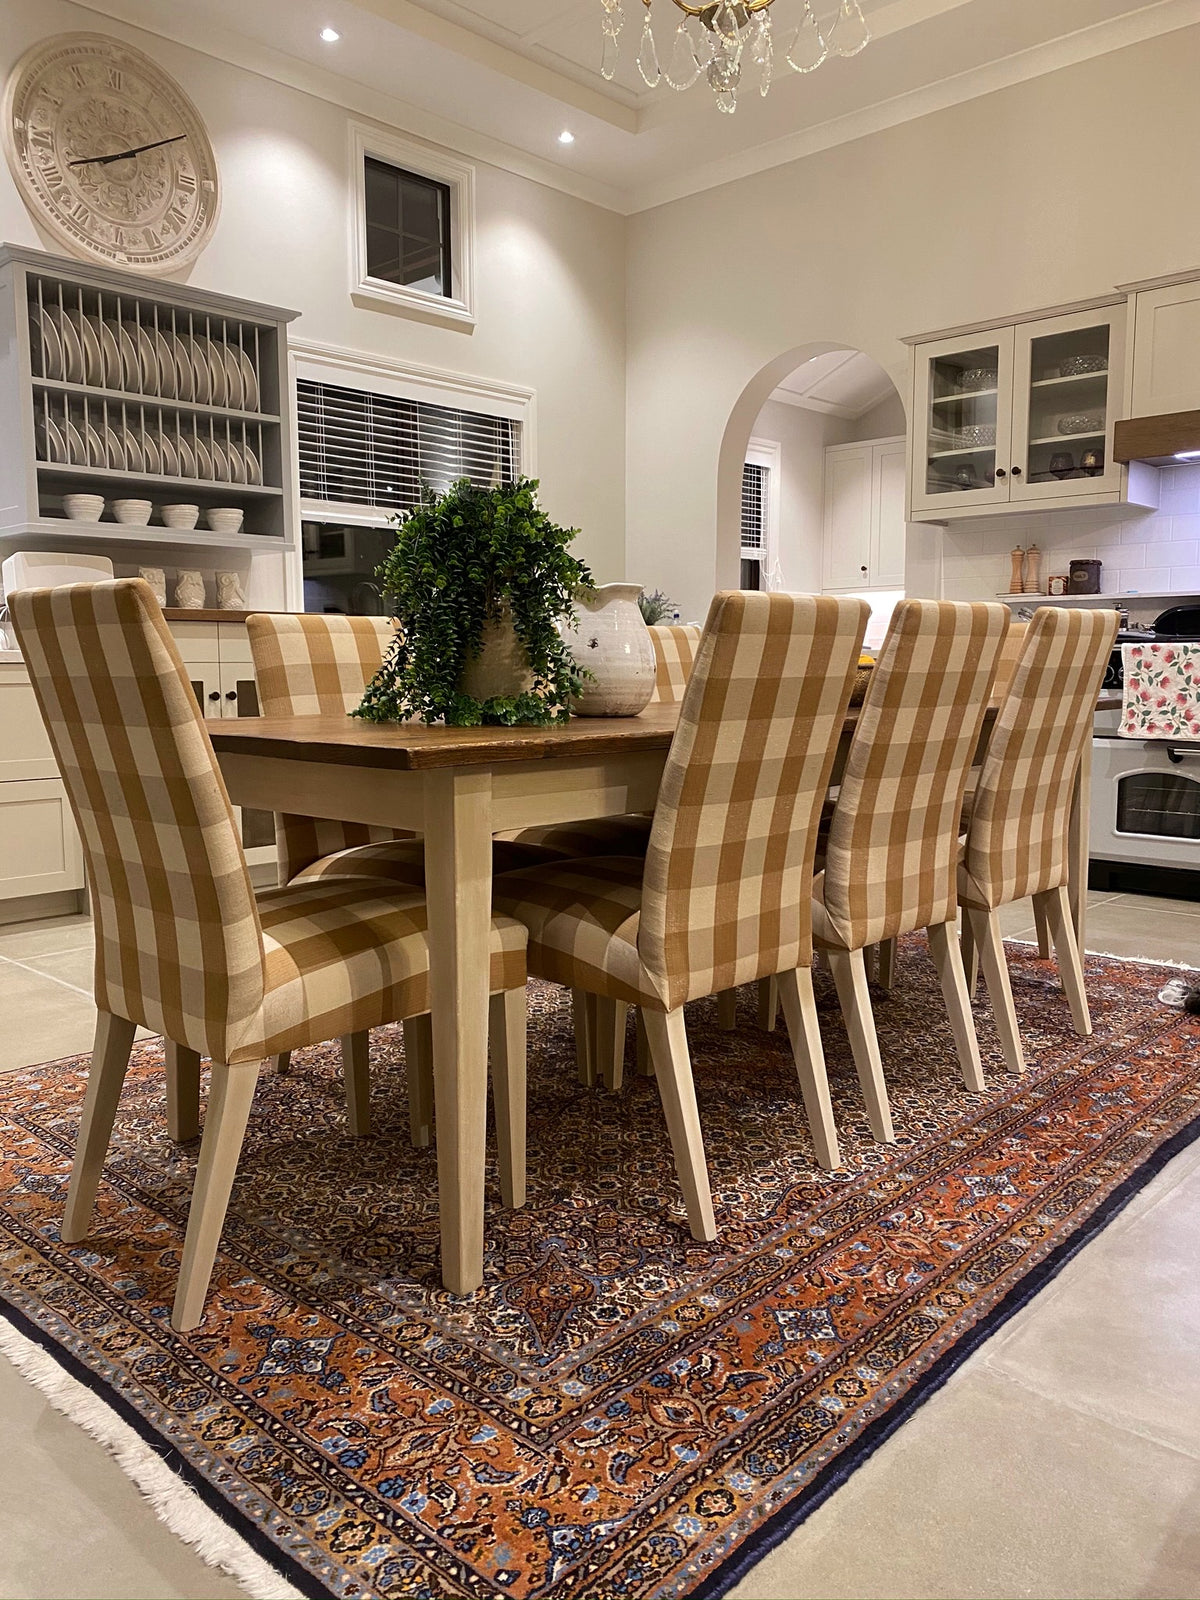 DINING TABLE & CHAIRS